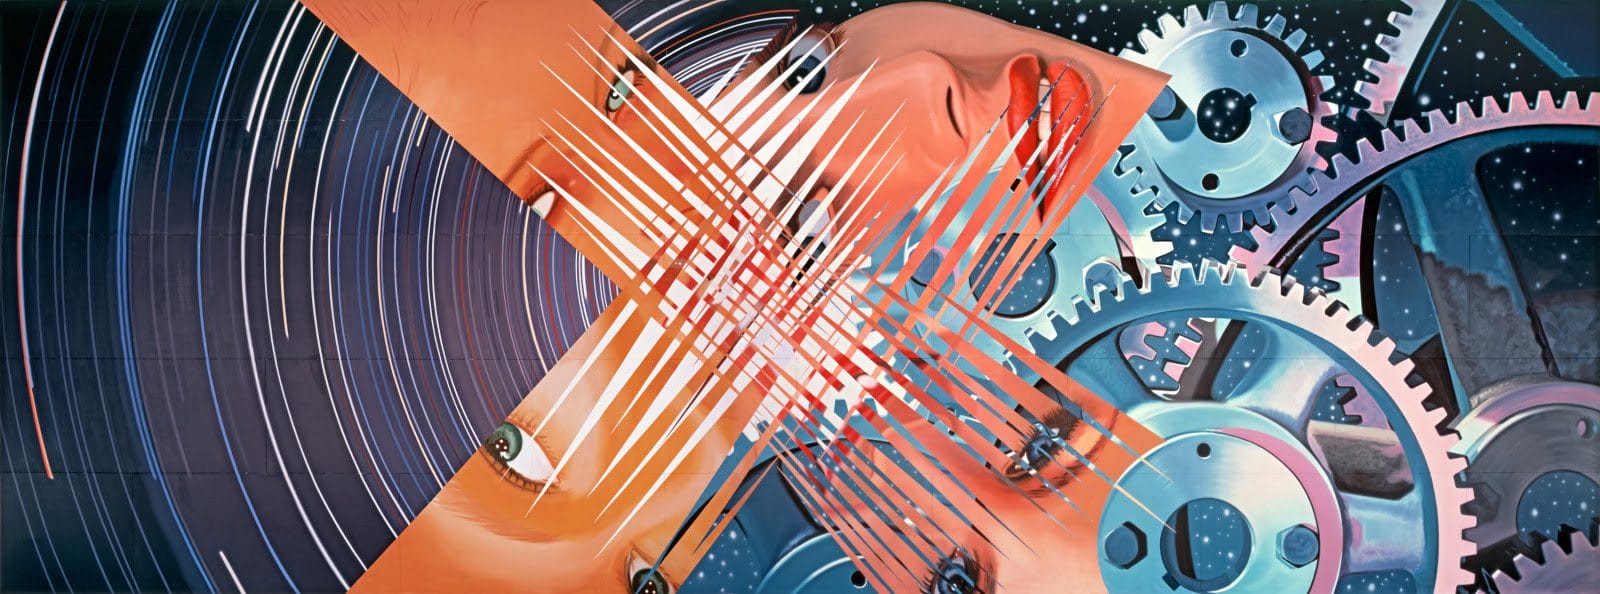 James Rosenquist, Four New Clear Women, 1982, oil on canvas, 205 x 757 x 552 inches, 520.7 x 1922.8 x 1402.1 cm. © 2021 James Rosenquist, Inc. / Licensed by Artists Rights Society (ARS), NY. Used by permission. All rights reserved.